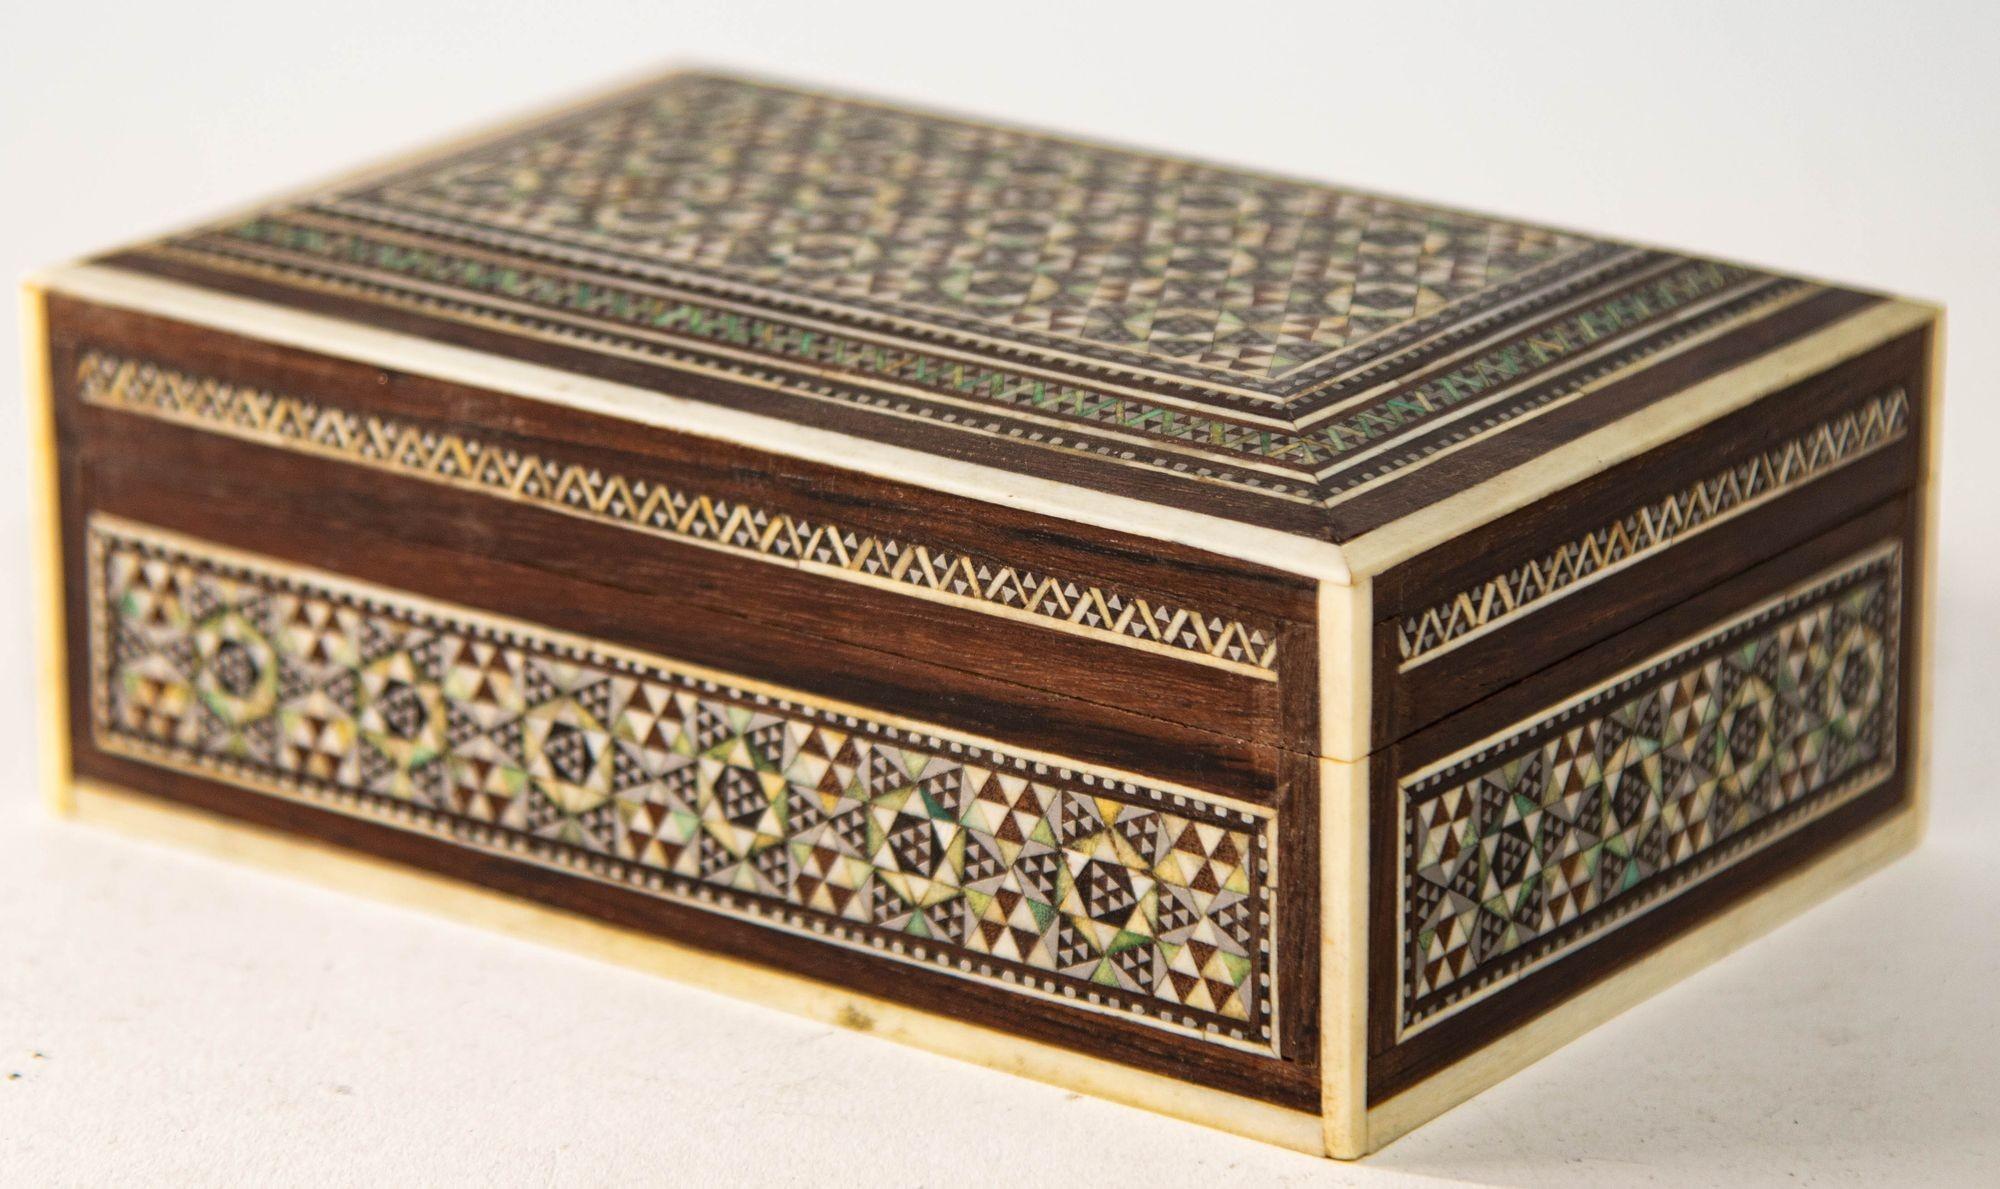 Lebanese 1940s Mother of Pearl Inlaid Decorative Middle Eastern Islamic Box For Sale